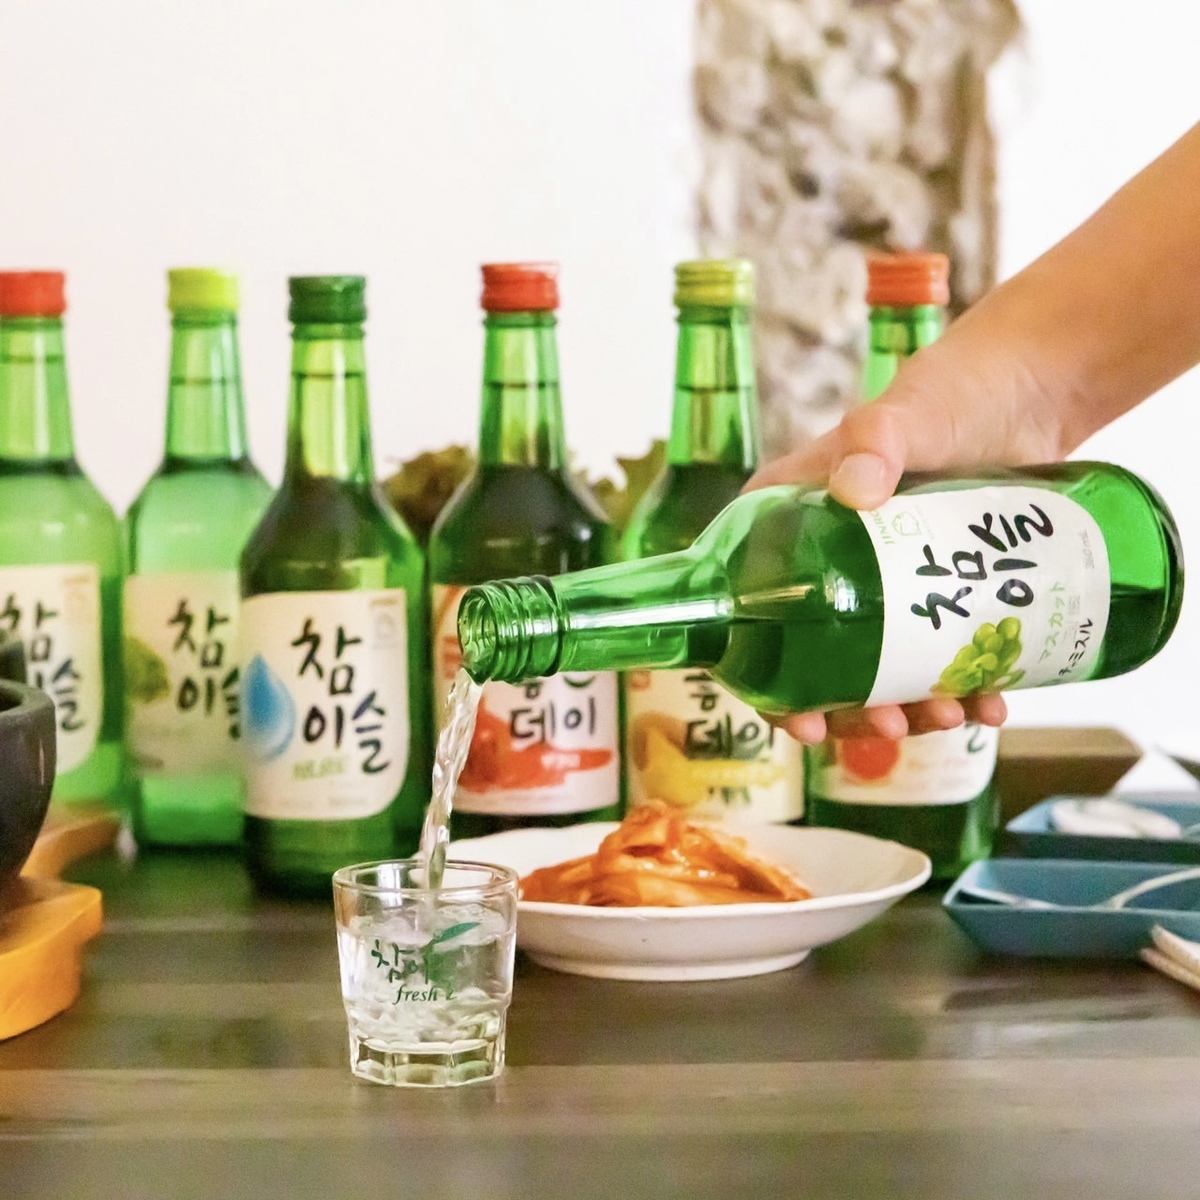 Draft beer and the popular chamisul are also available! You can choose from Korean cocktails and Korean juice for 2 hours all-you-can-drink for 2,000 yen ⇒ 1,650 yen (incl. tax)